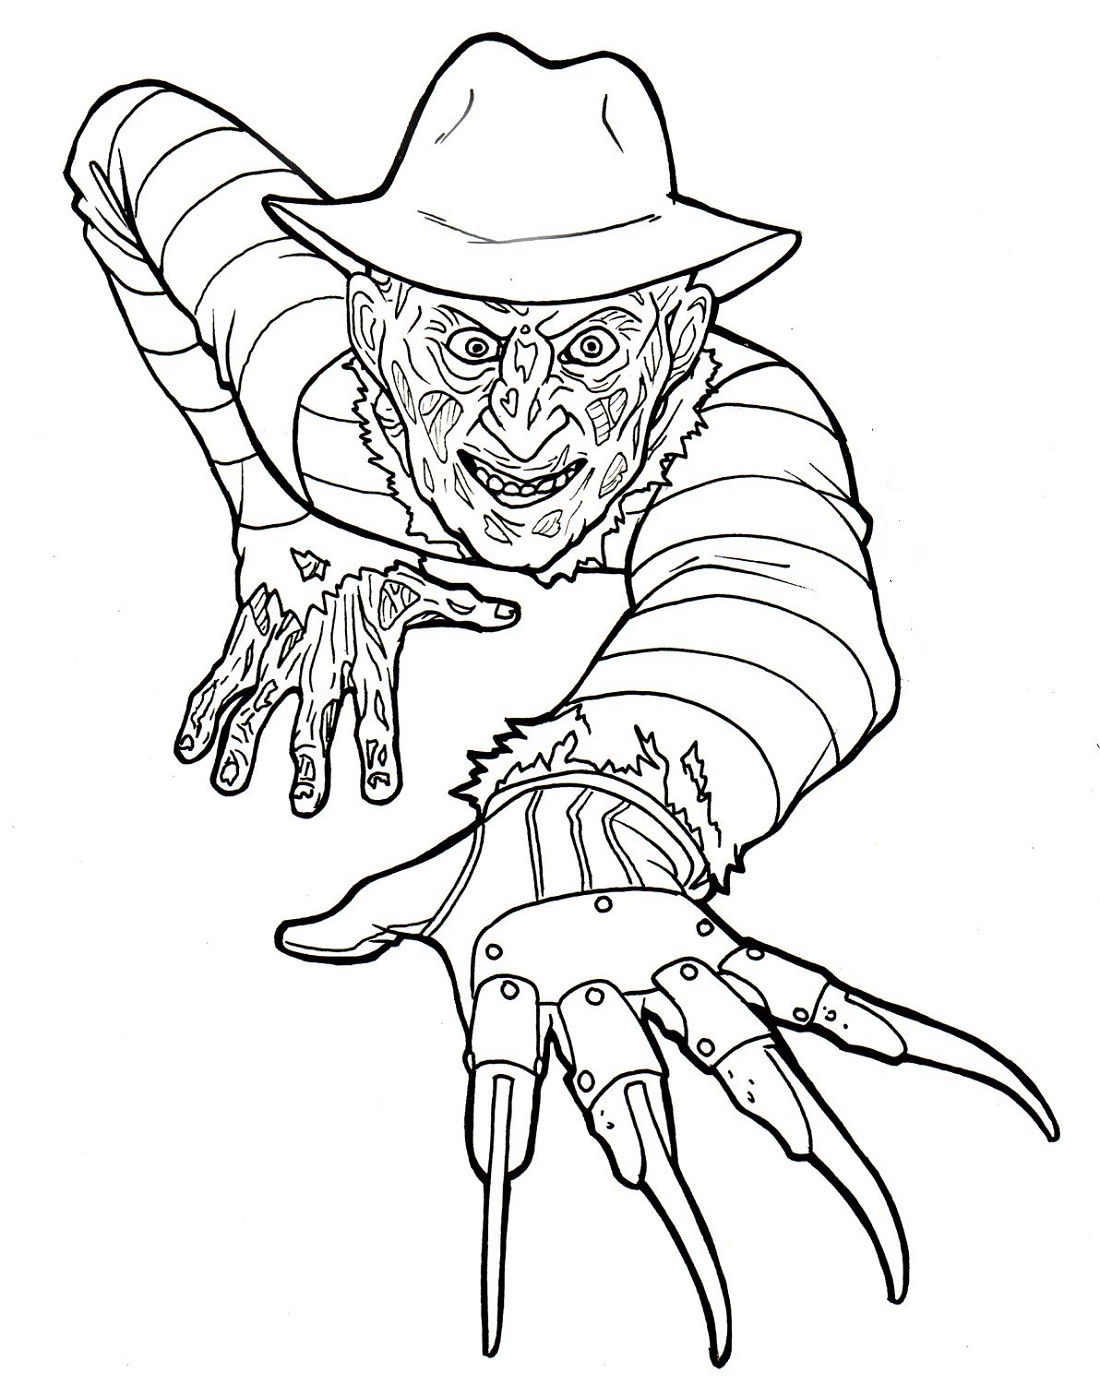 Freddy Krueger Coloring Pages Printable